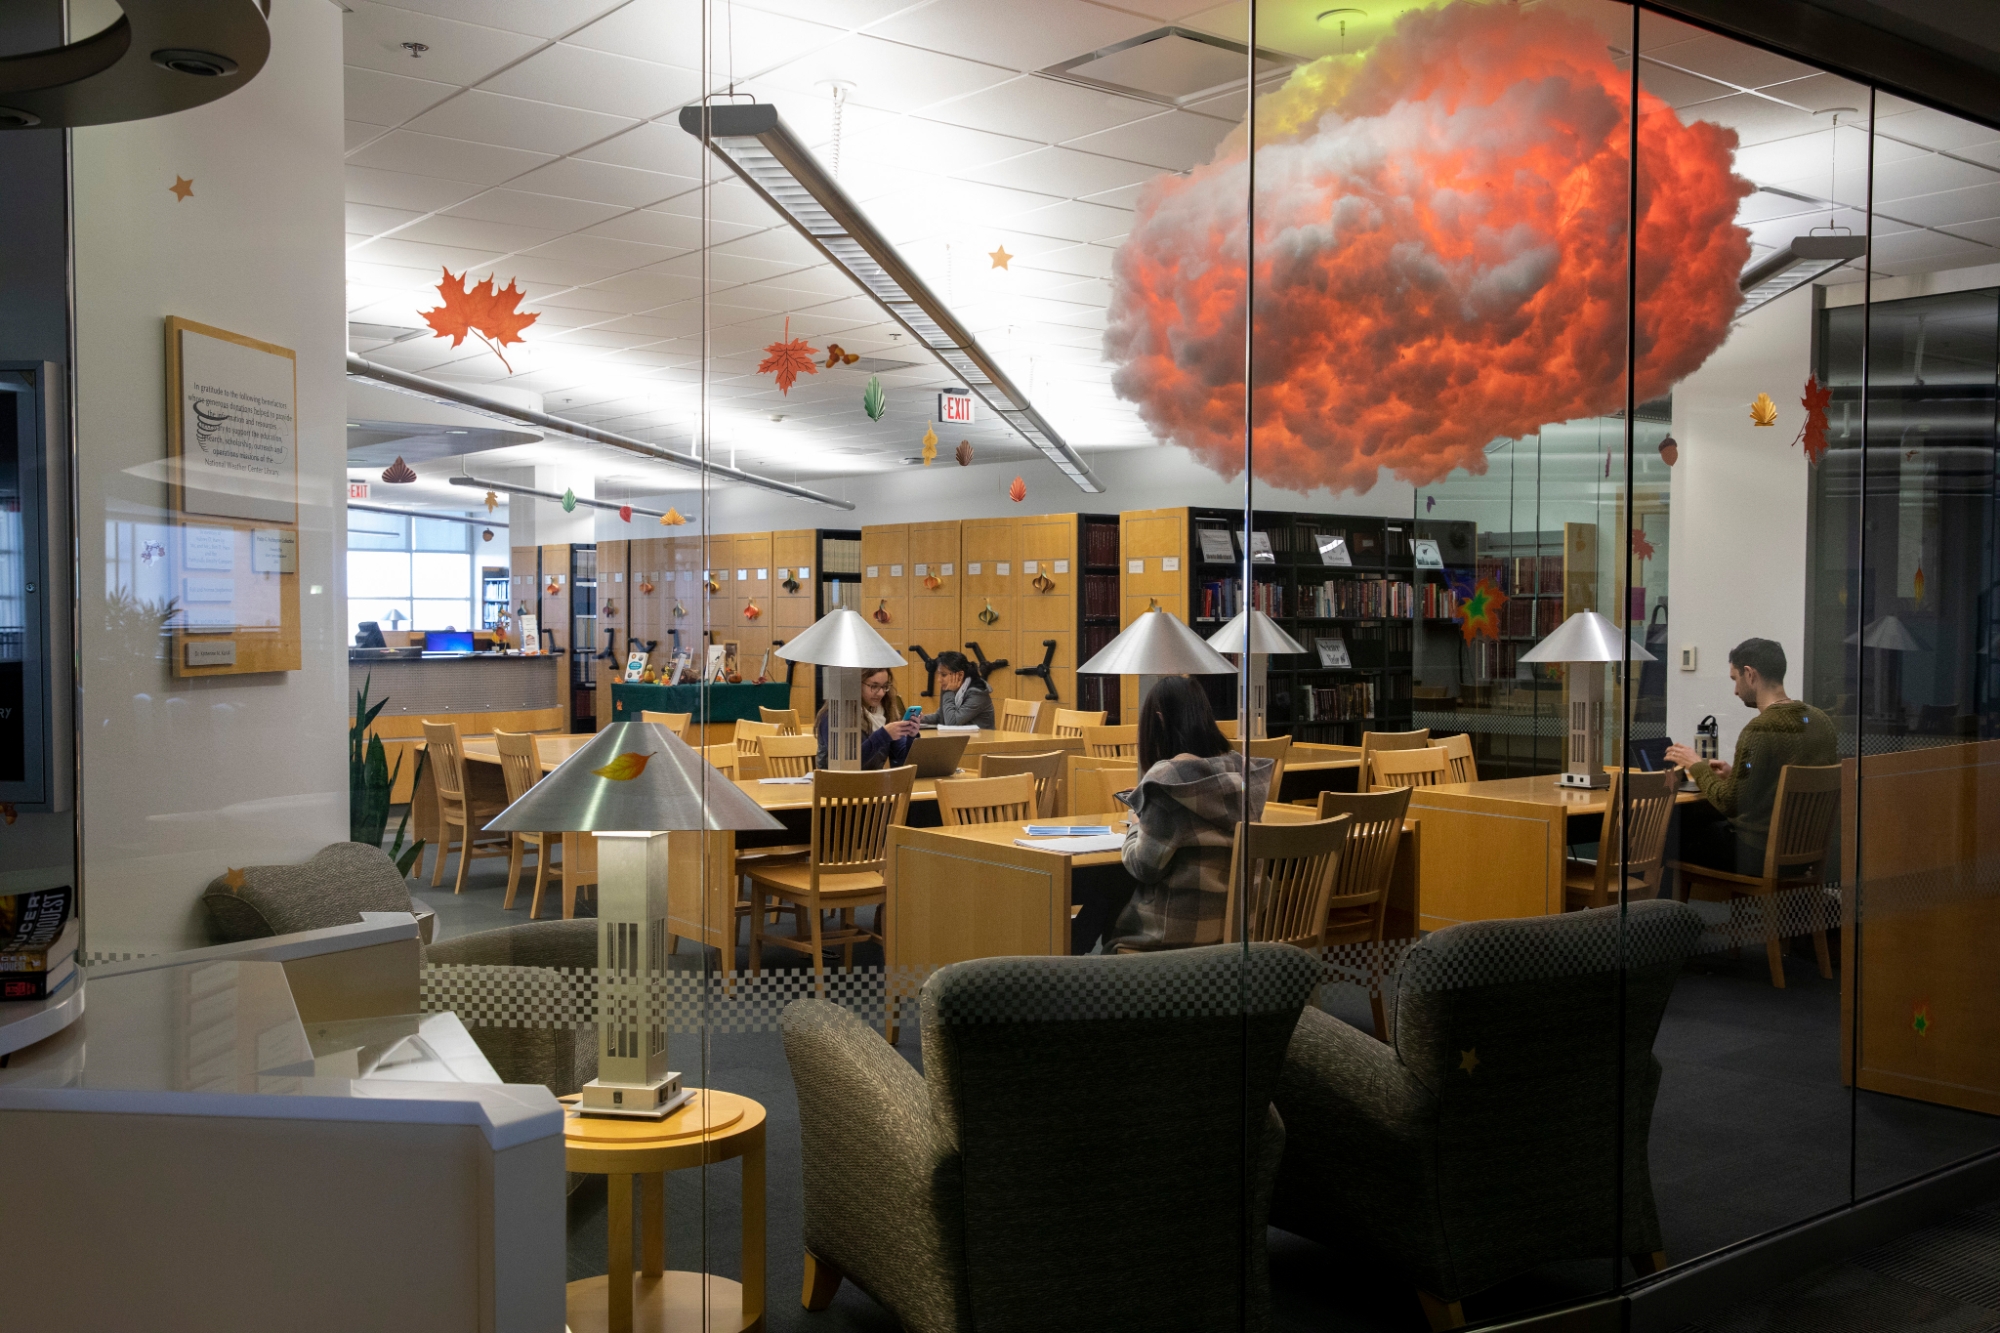 NWC Library with fall decorations, the orange leaves compliment the orange colored cloud behind the glass wall.